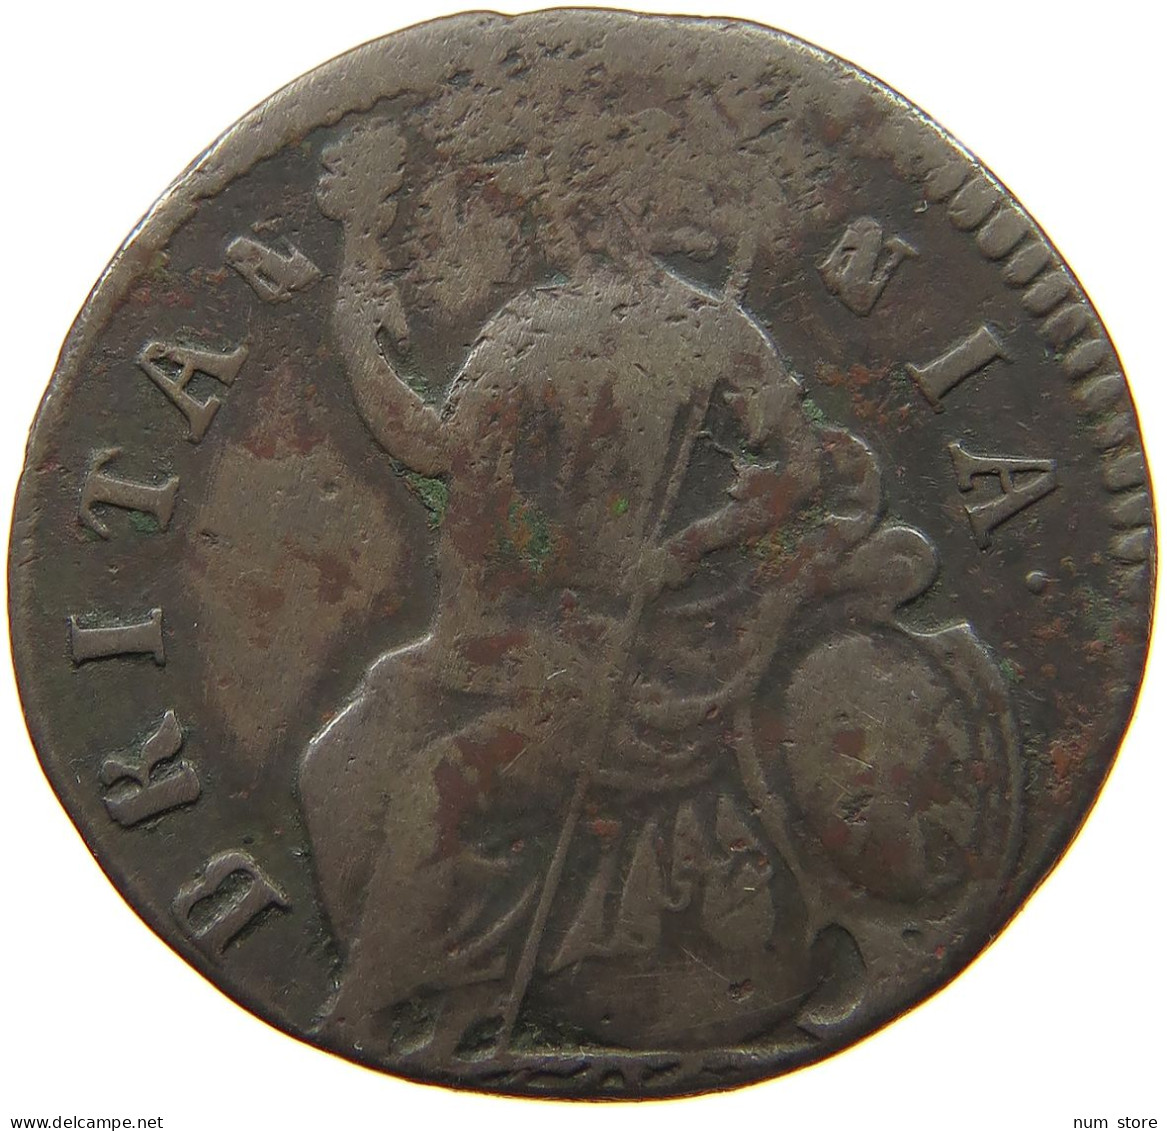 GREAT BRITAIN HALFPENNY  WILLIAM III. (1694-1702) OFF-CENTER #t100 0331 - B. 1/2 Penny